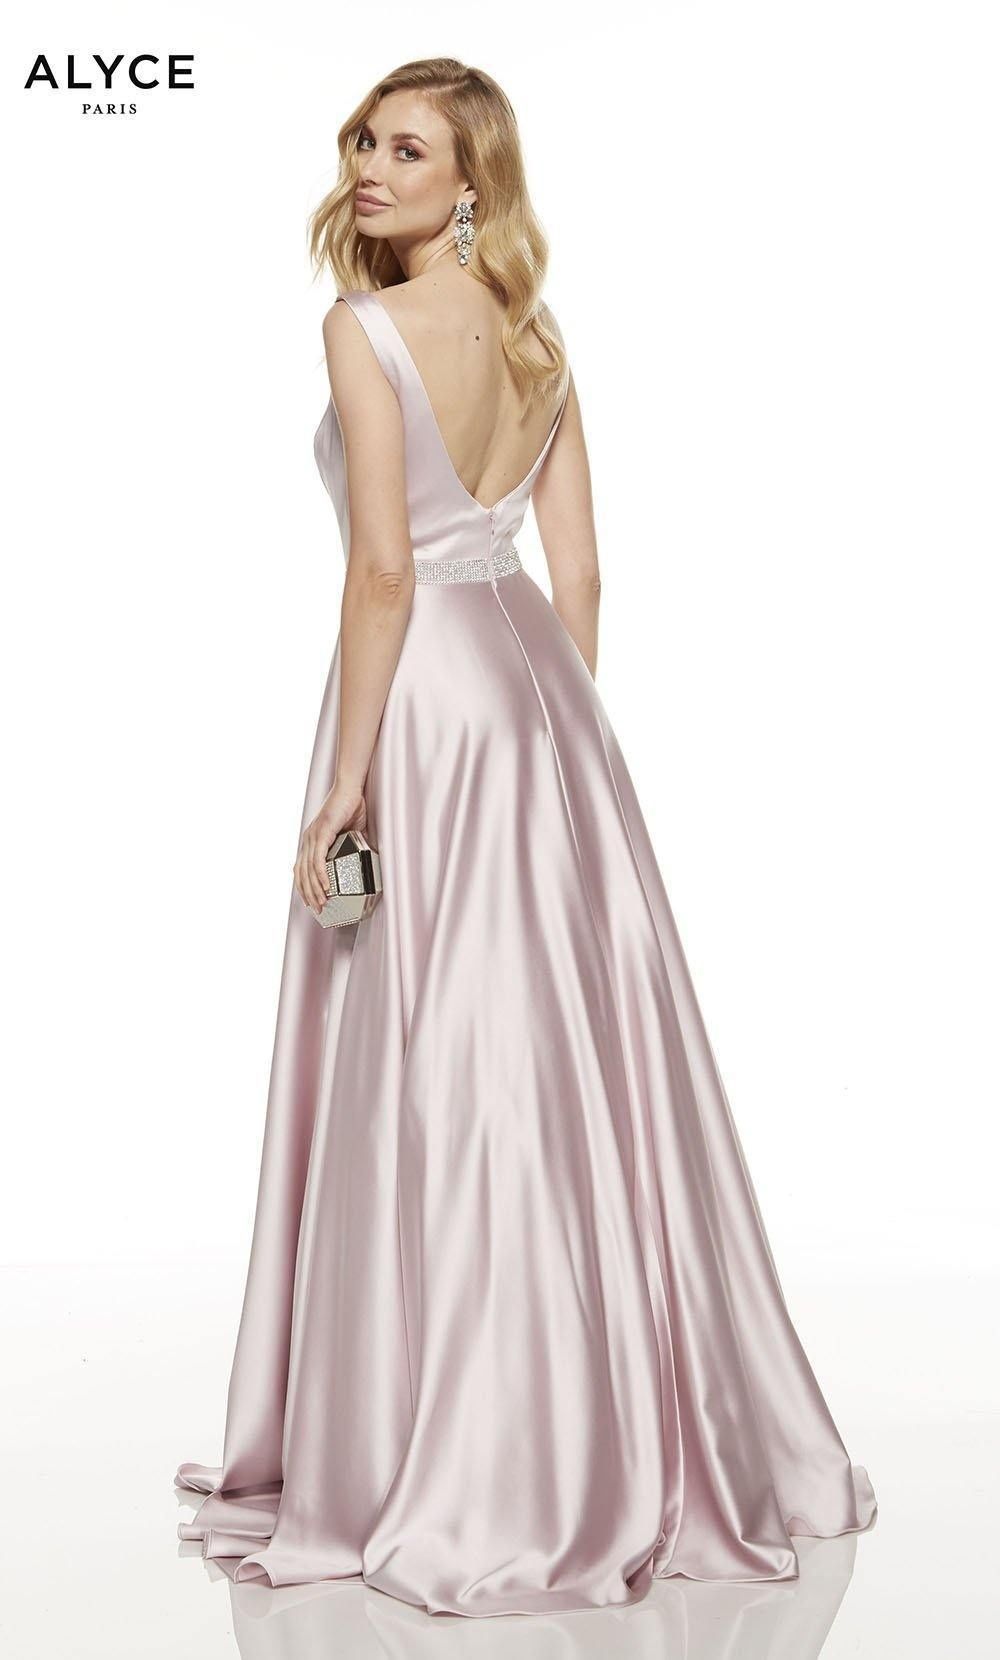 Style Rhianna The Secret Dress Plus Size 20 Prom High Neck Satin Light Pink Floor Length Maxi on Queenly